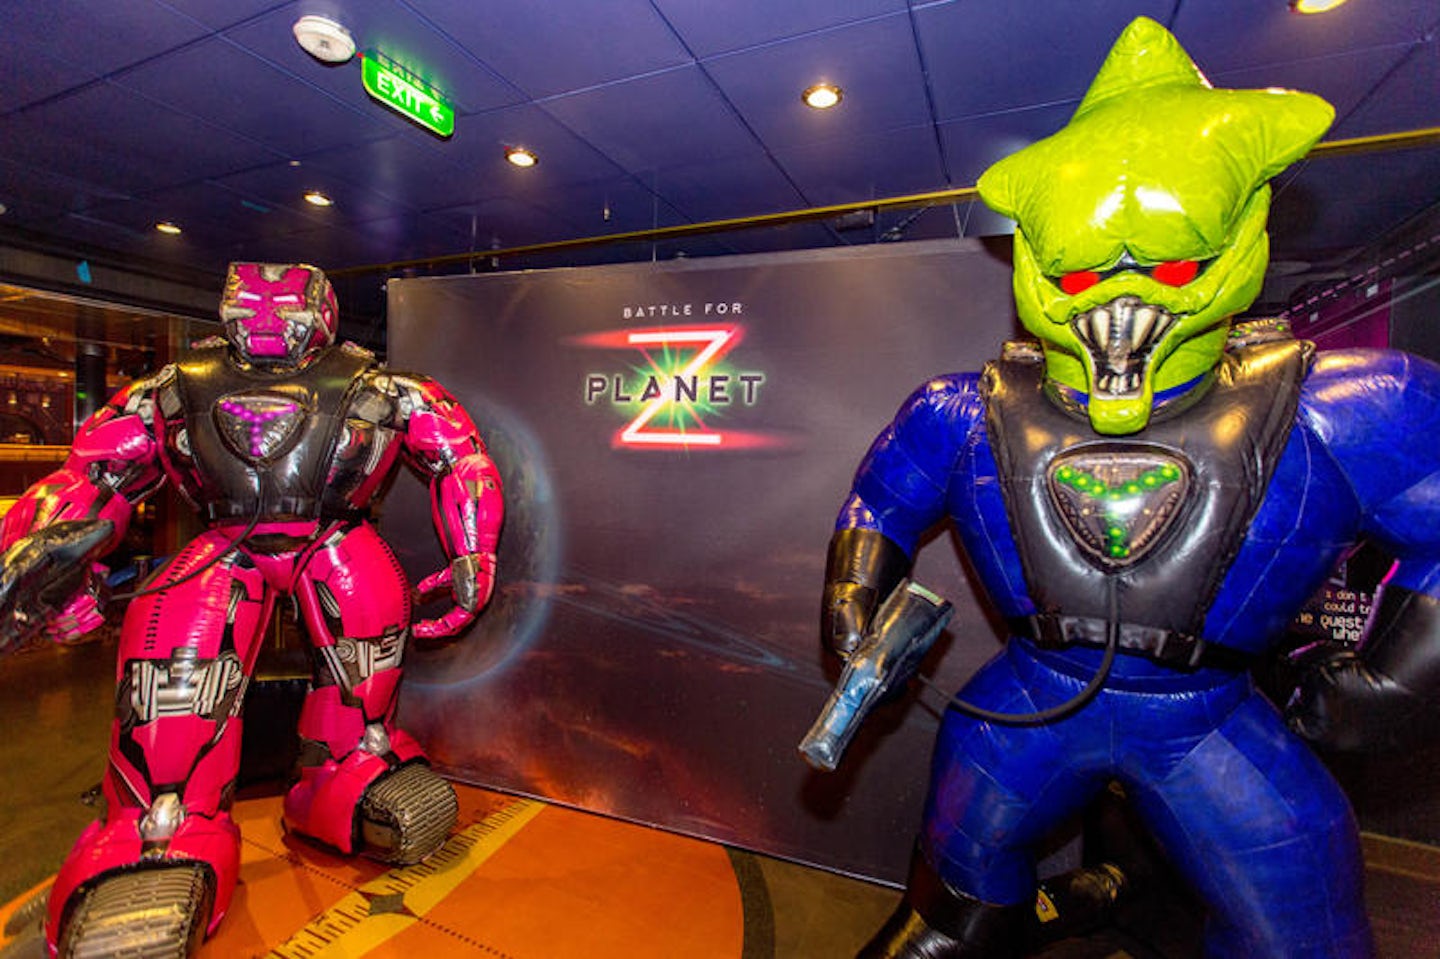 "Battle for Planet Z" Laser Tag on Mariner of the Seas